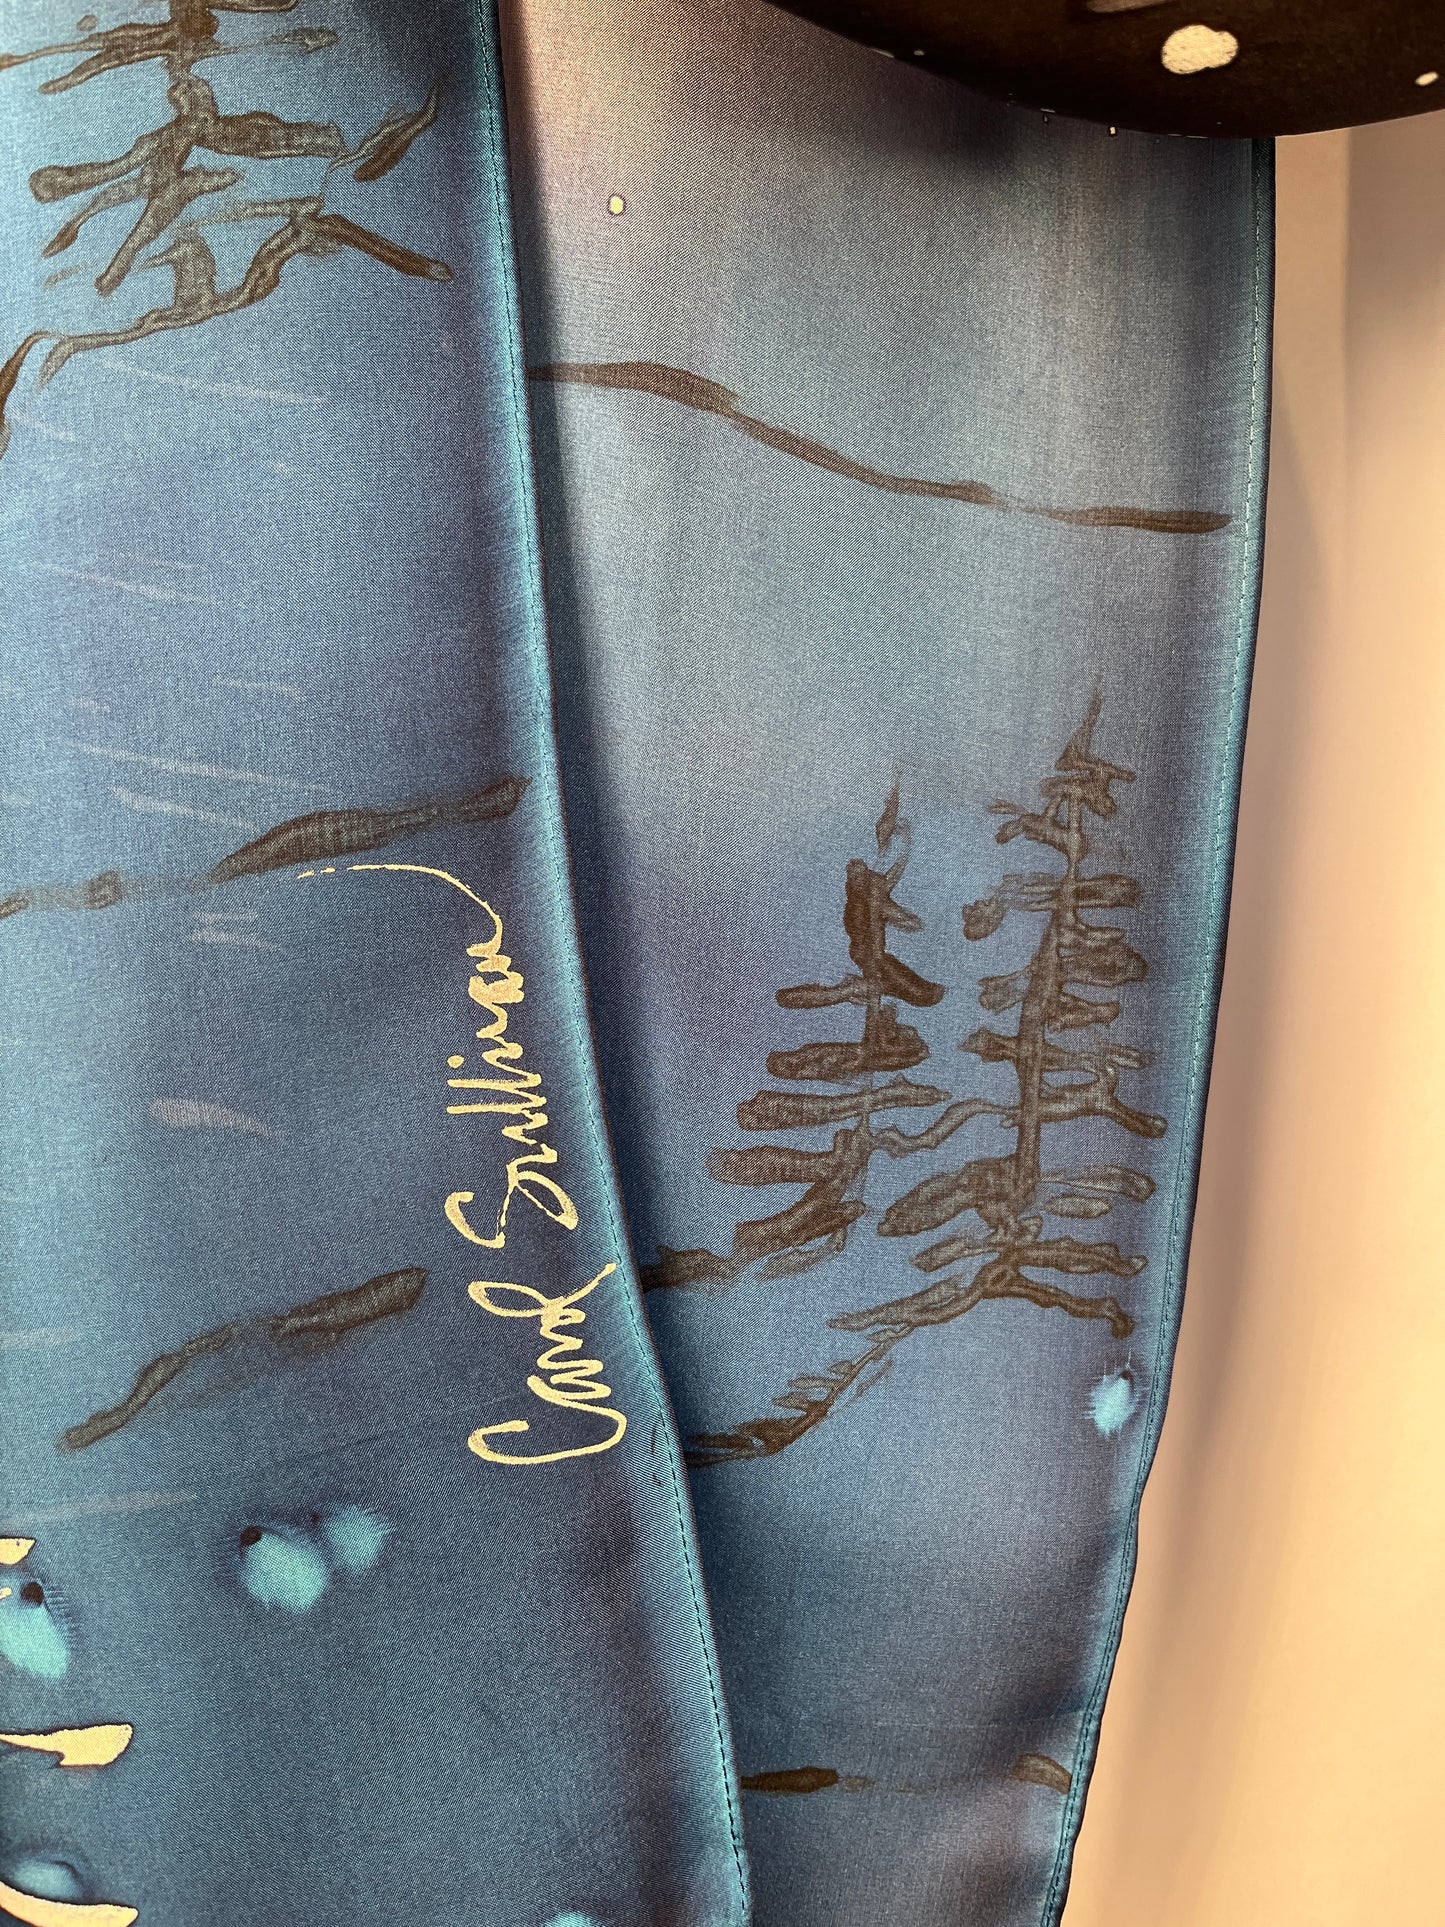 “Evening at the Coast" - Hand-dyed Silk Scarf - $125